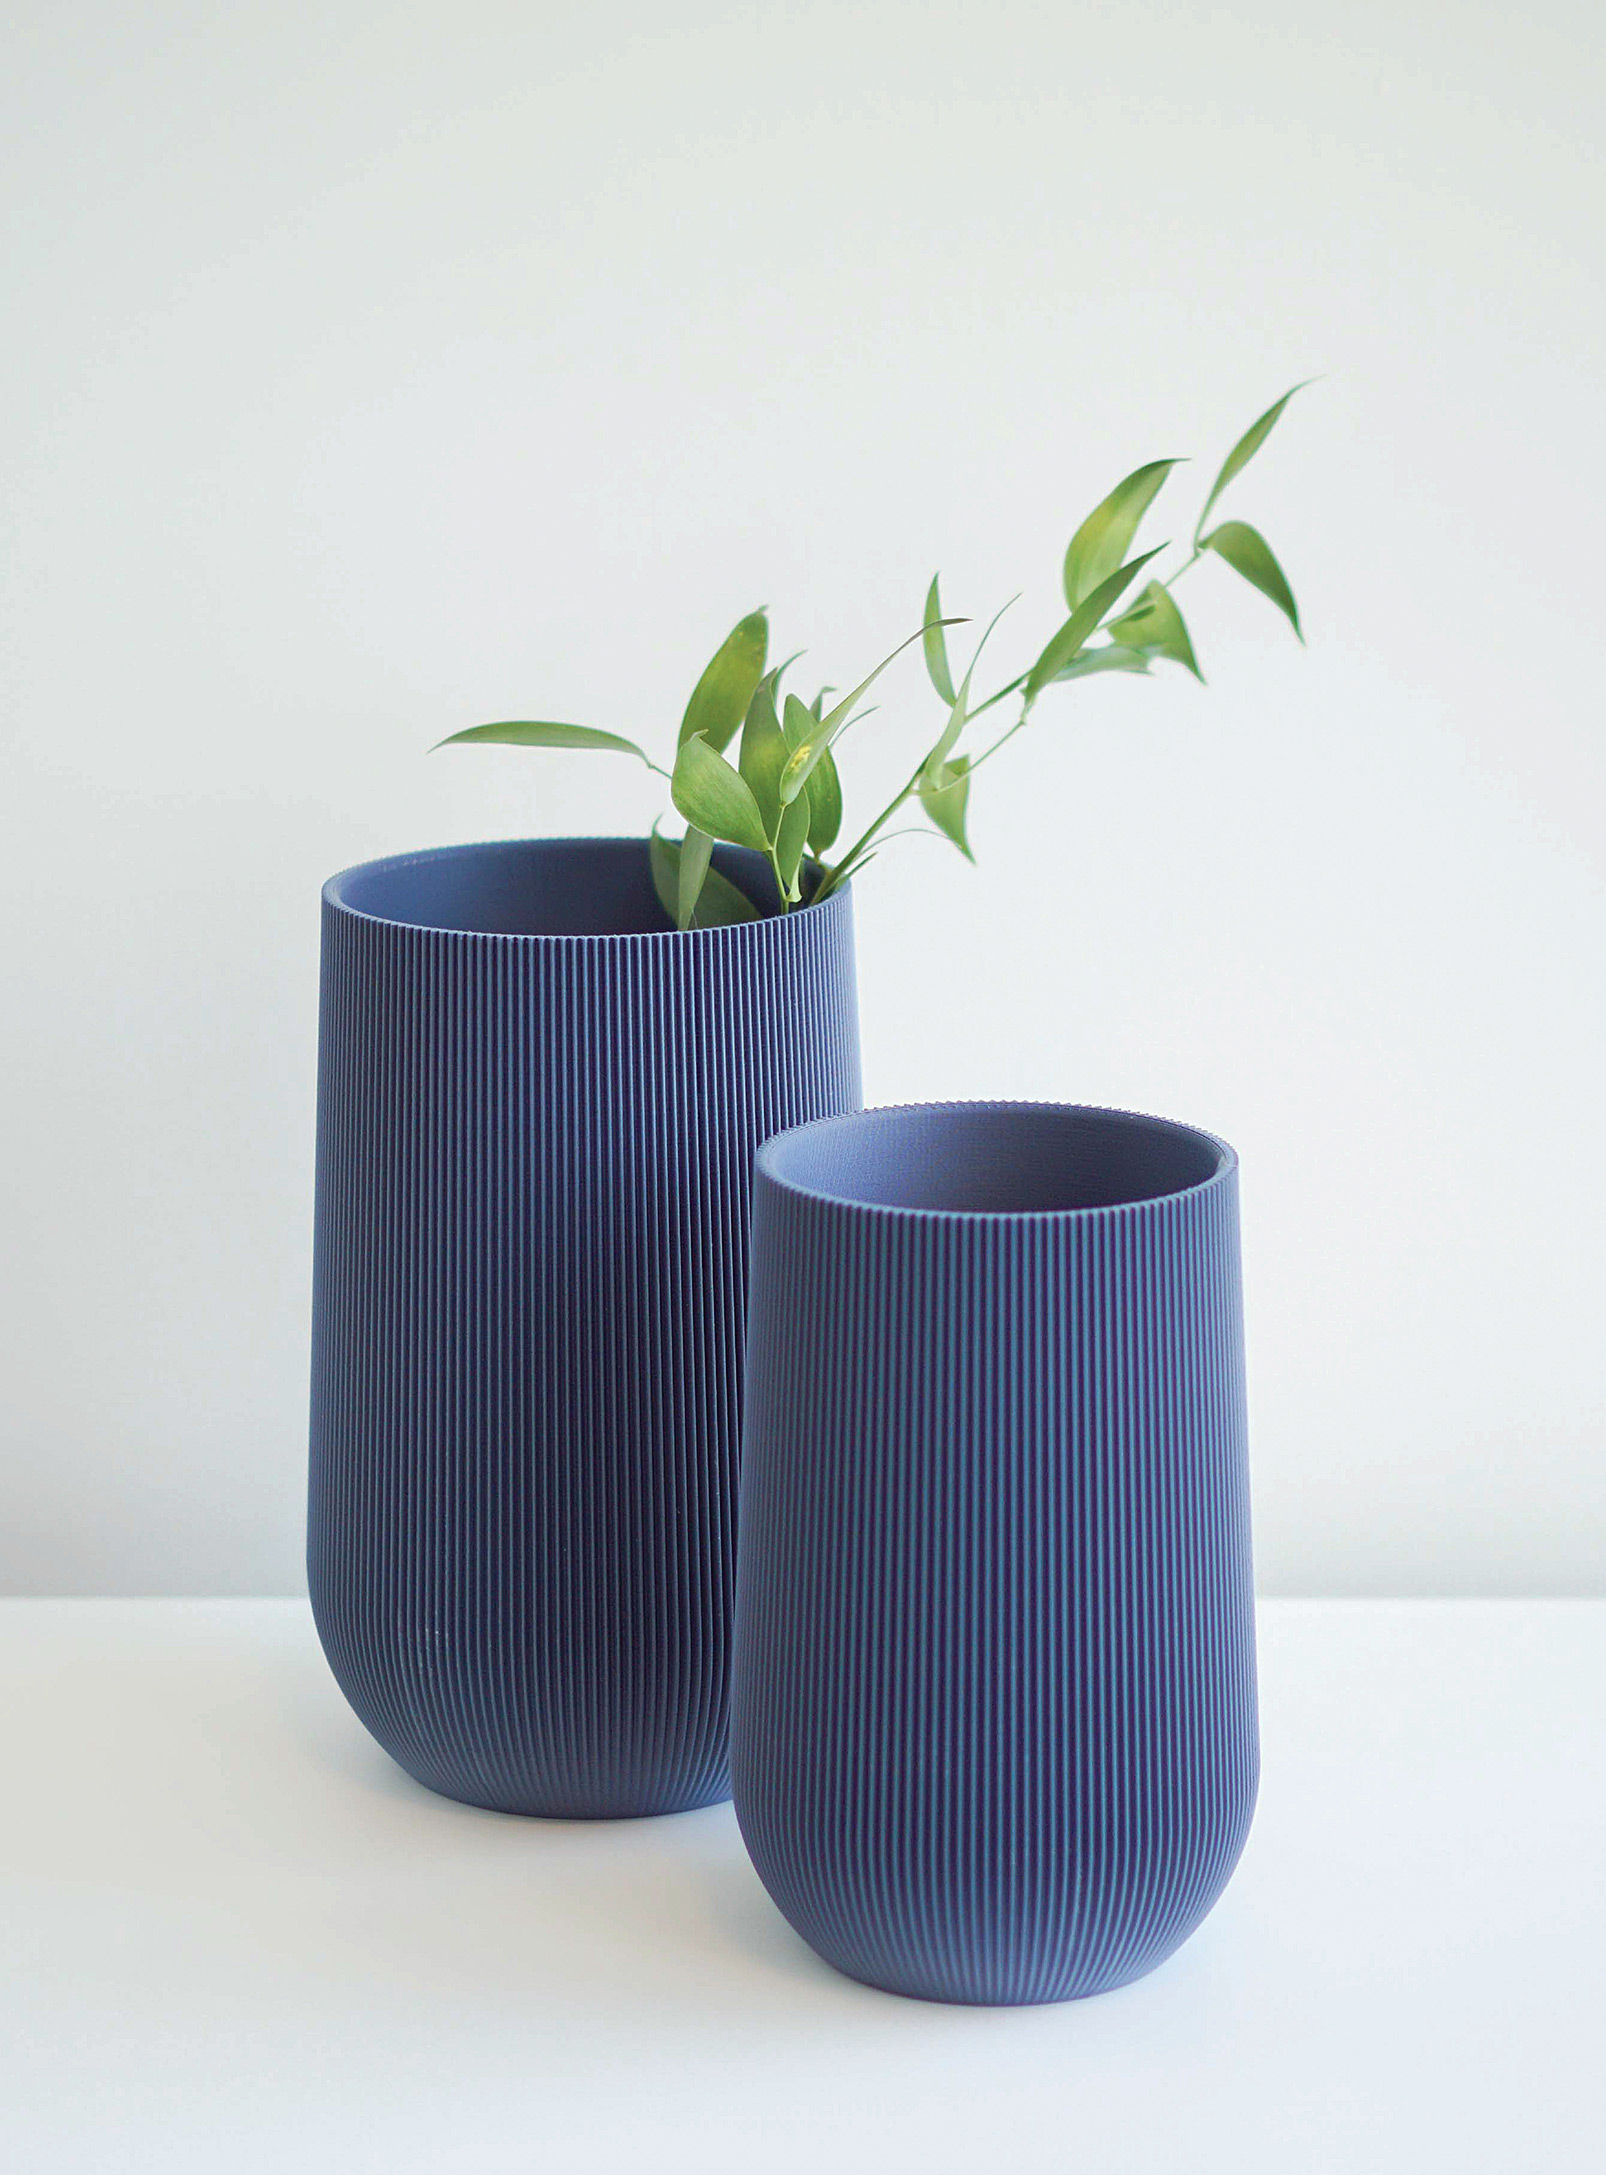 Conifer Homewares Sequoia Plant-based Vase See Available Sizes In Marine Blue